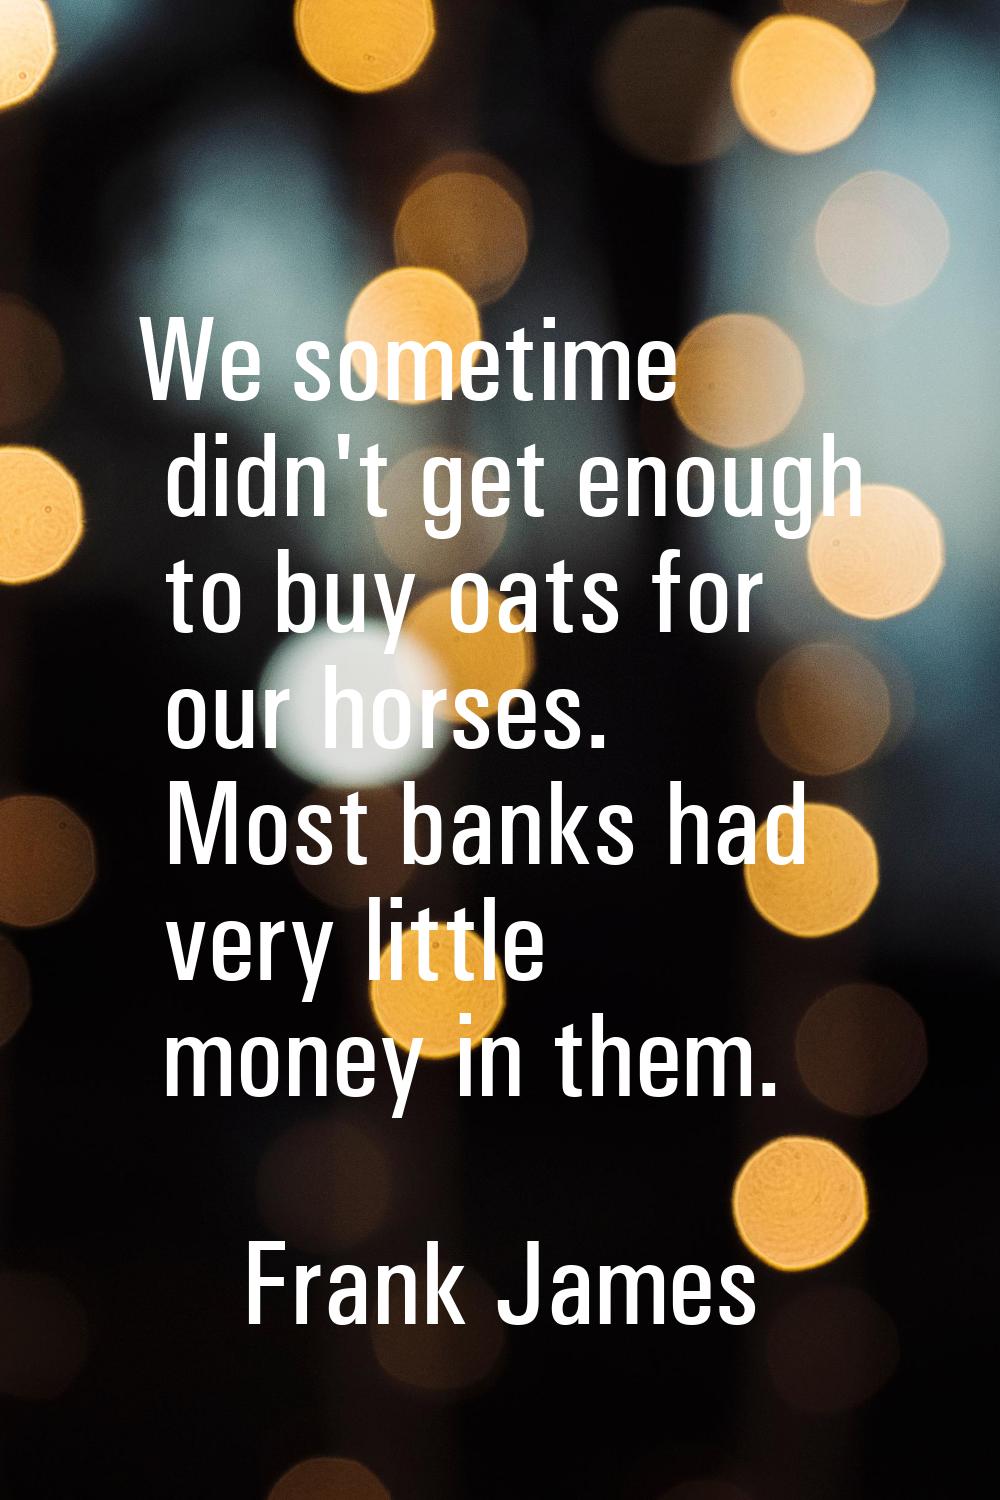 We sometime didn't get enough to buy oats for our horses. Most banks had very little money in them.